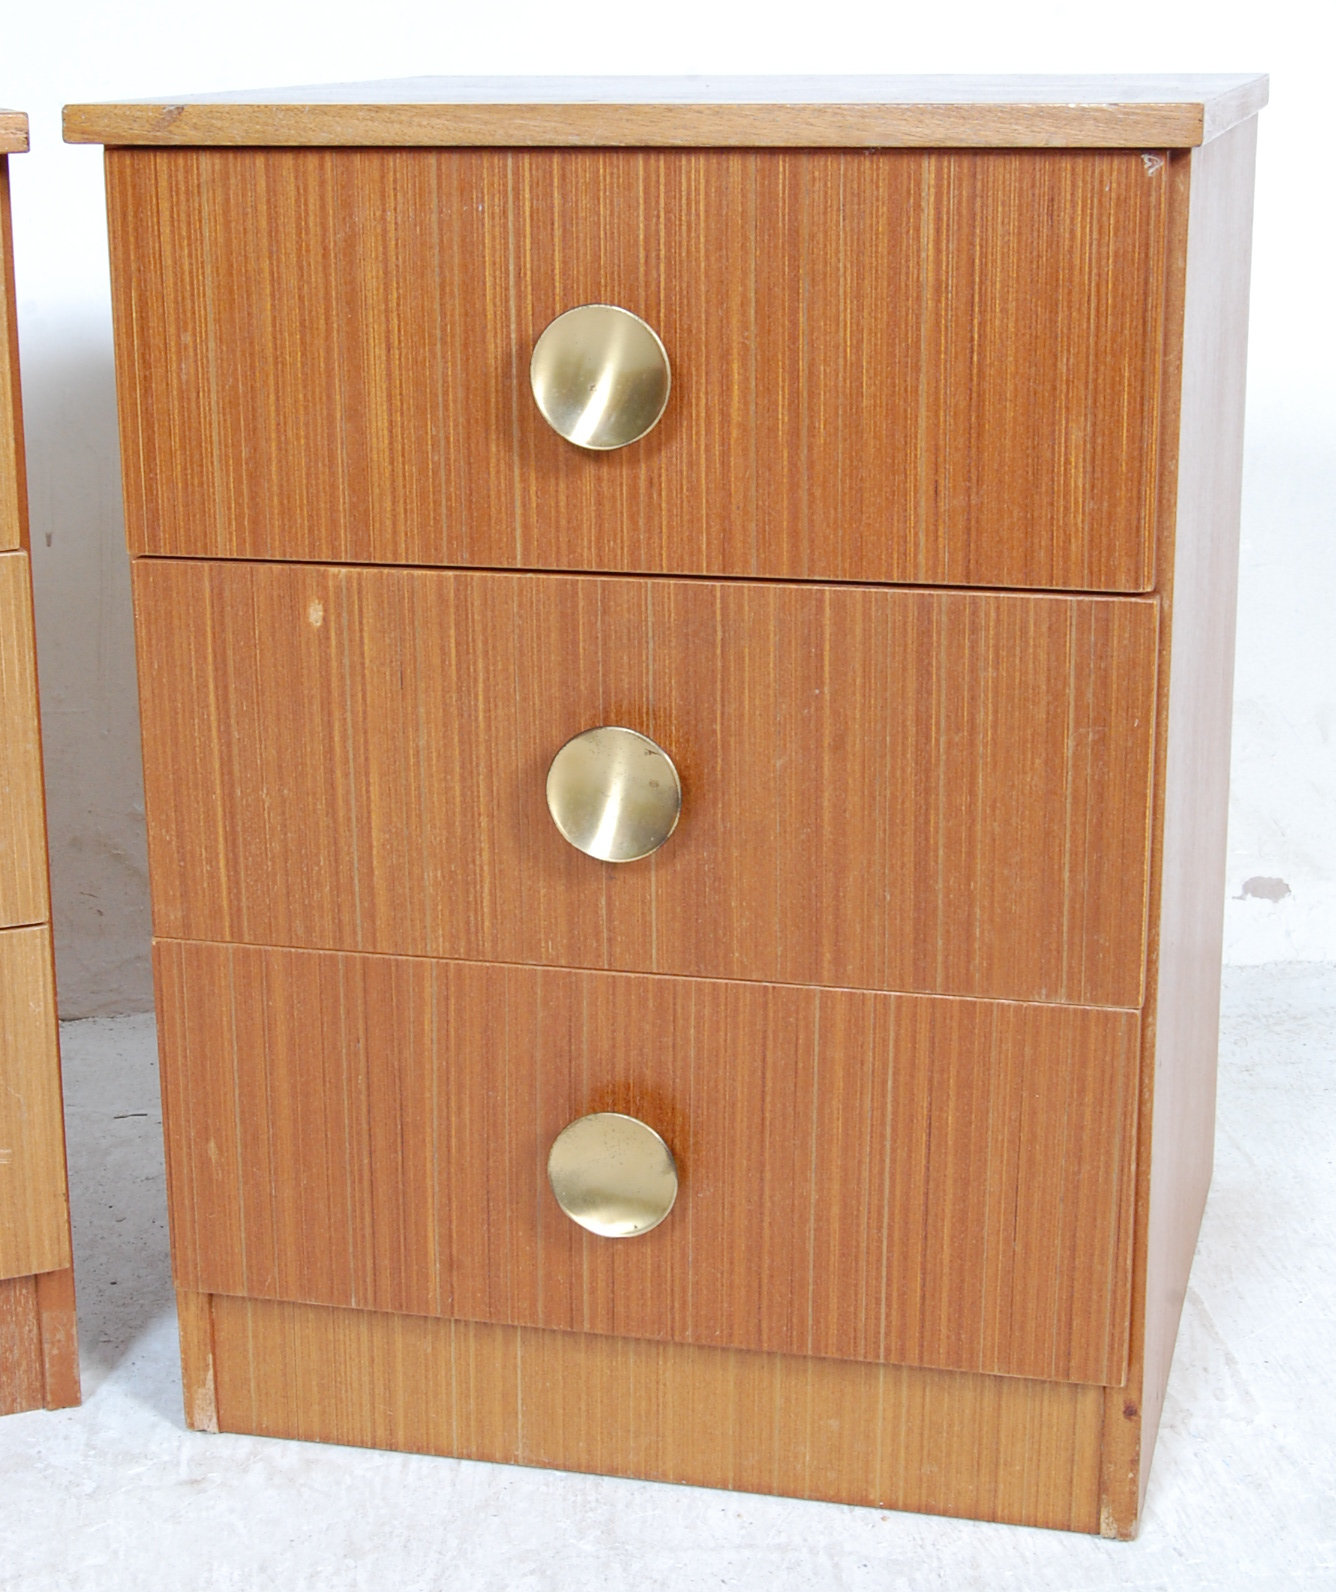 MID CENTURY RETRO TEAK WOOD BEDSIDE CHESTS OF DRAWERS - Image 7 of 7